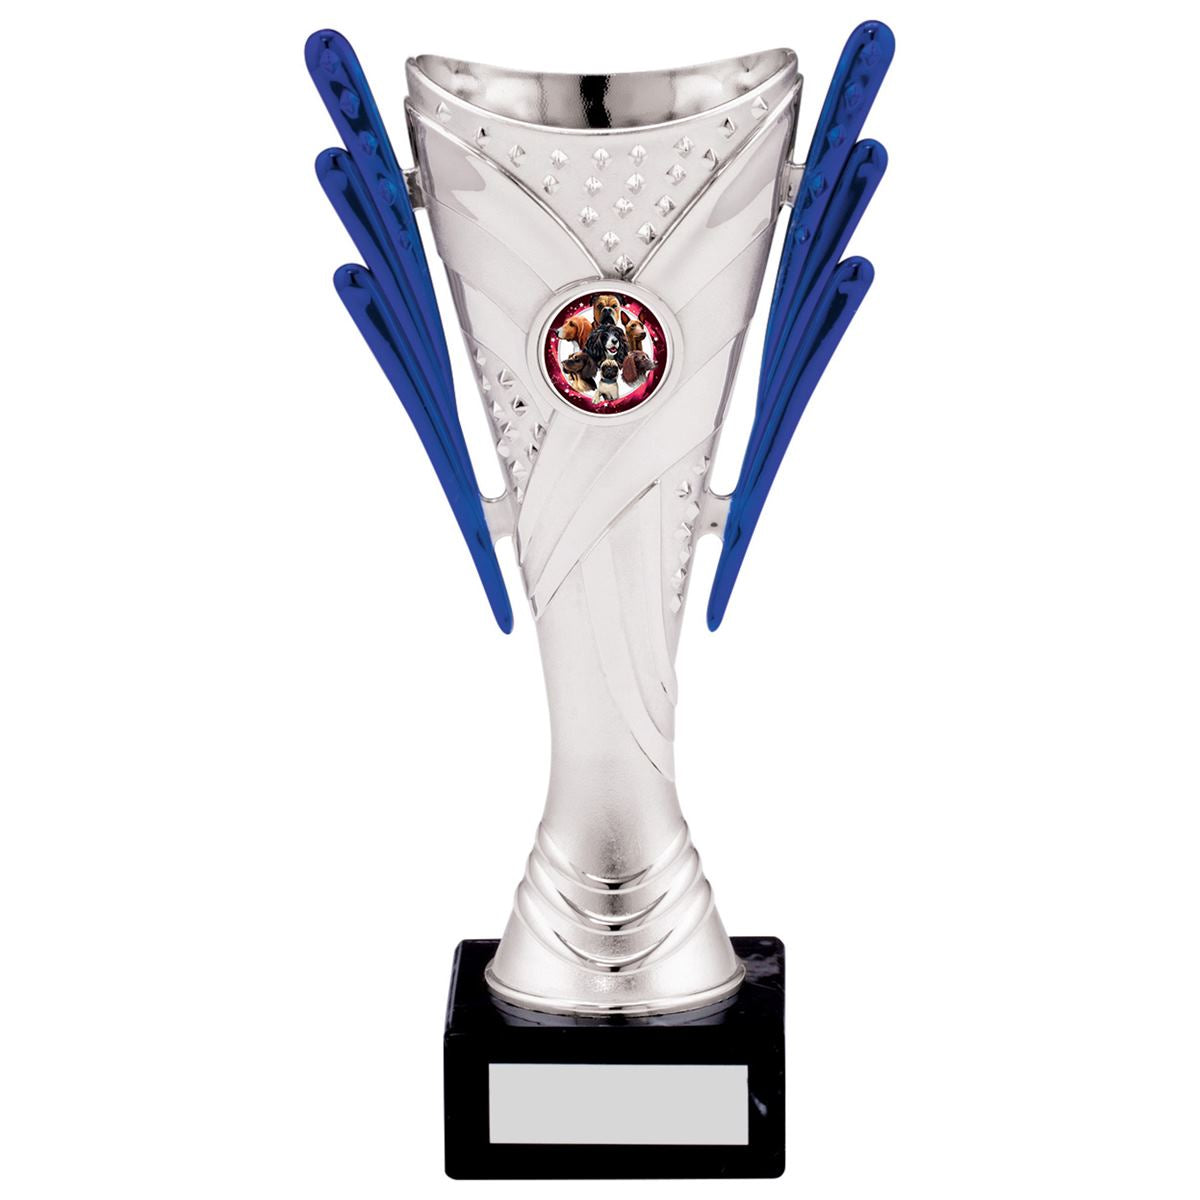 Trophy Cup Tower Award in Silver and Blue - A Size